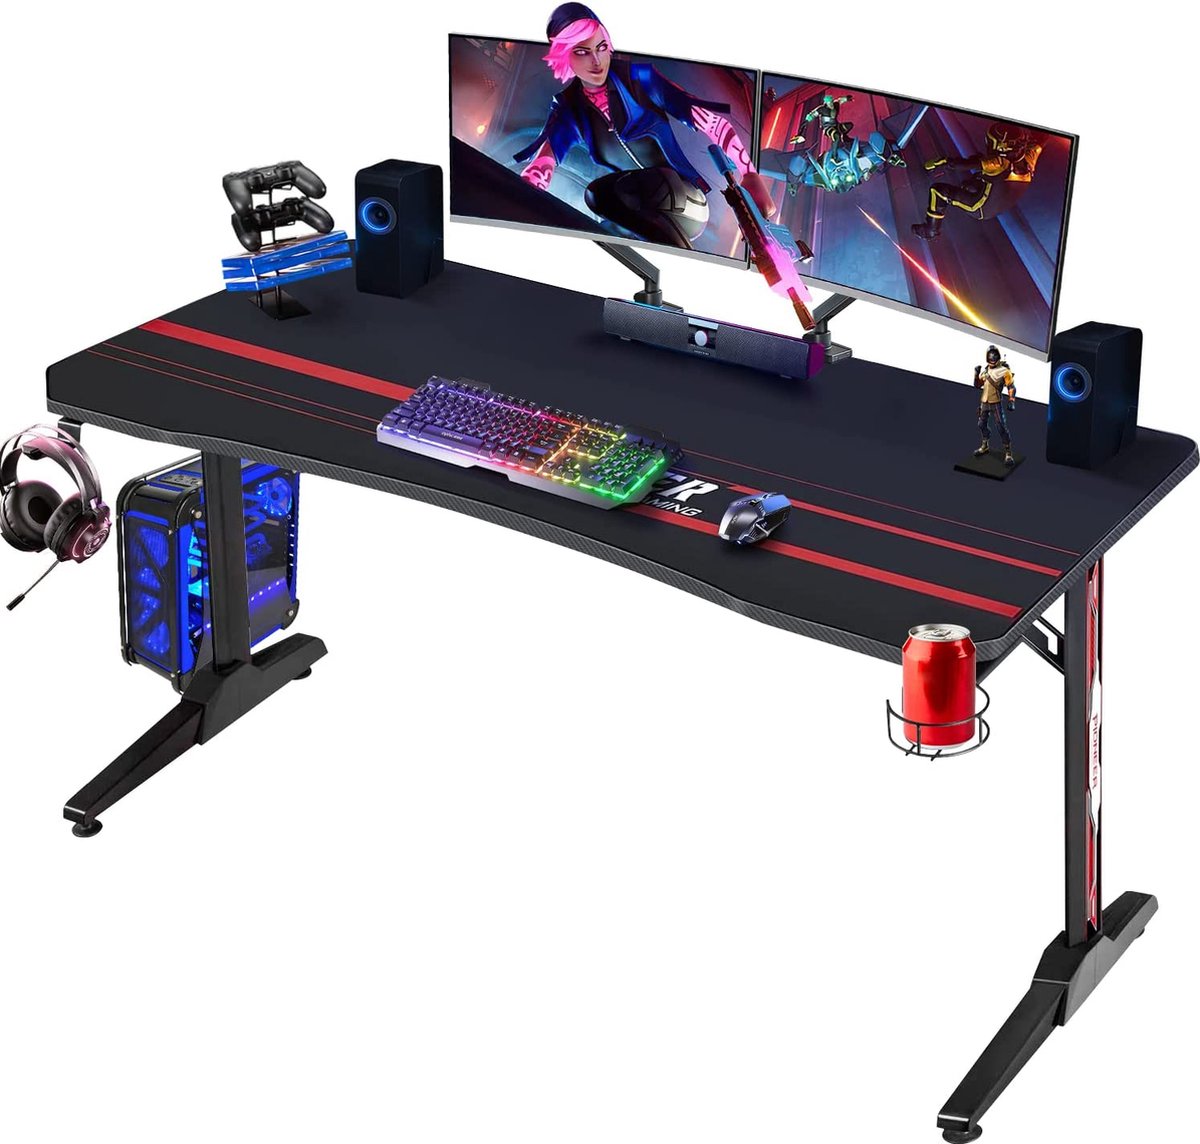 Gaiming Table Gaming Desk Gamer Computer Desk Ergonomic PC Desk with Cup Holder and Headphone Holder T-shaped